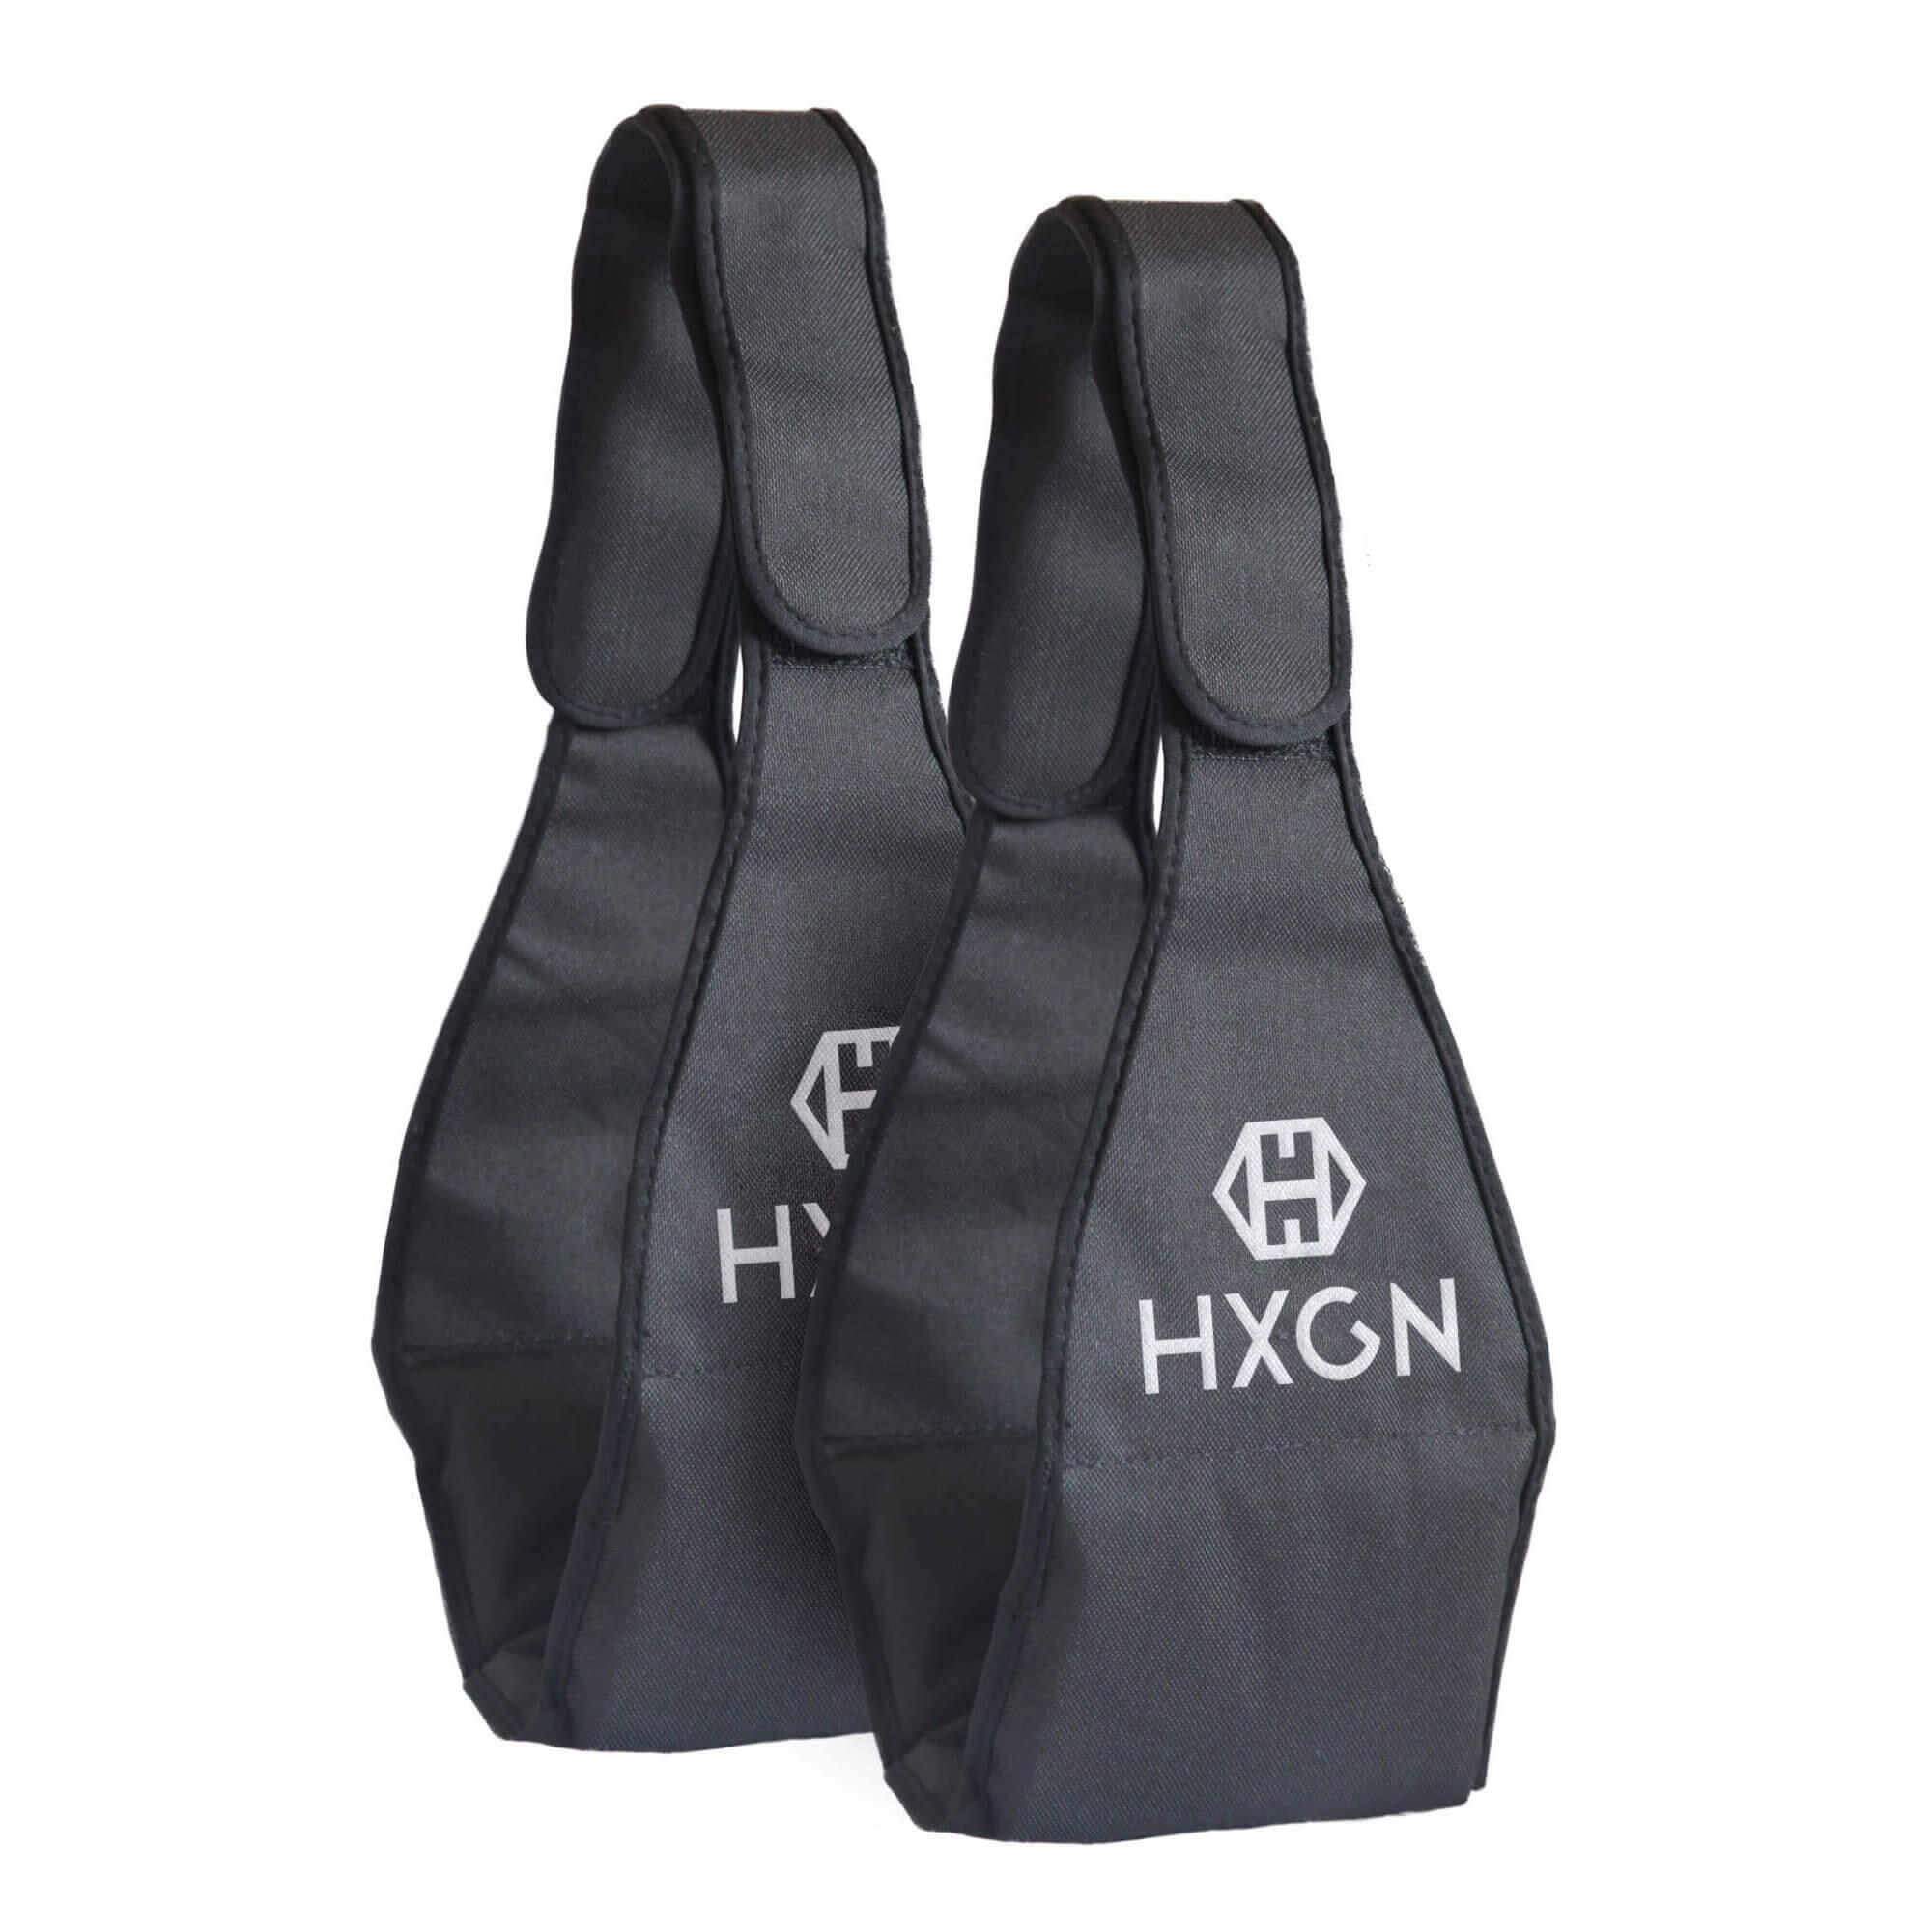 HXGN HXGN Adjustable Hanging Ab Straps